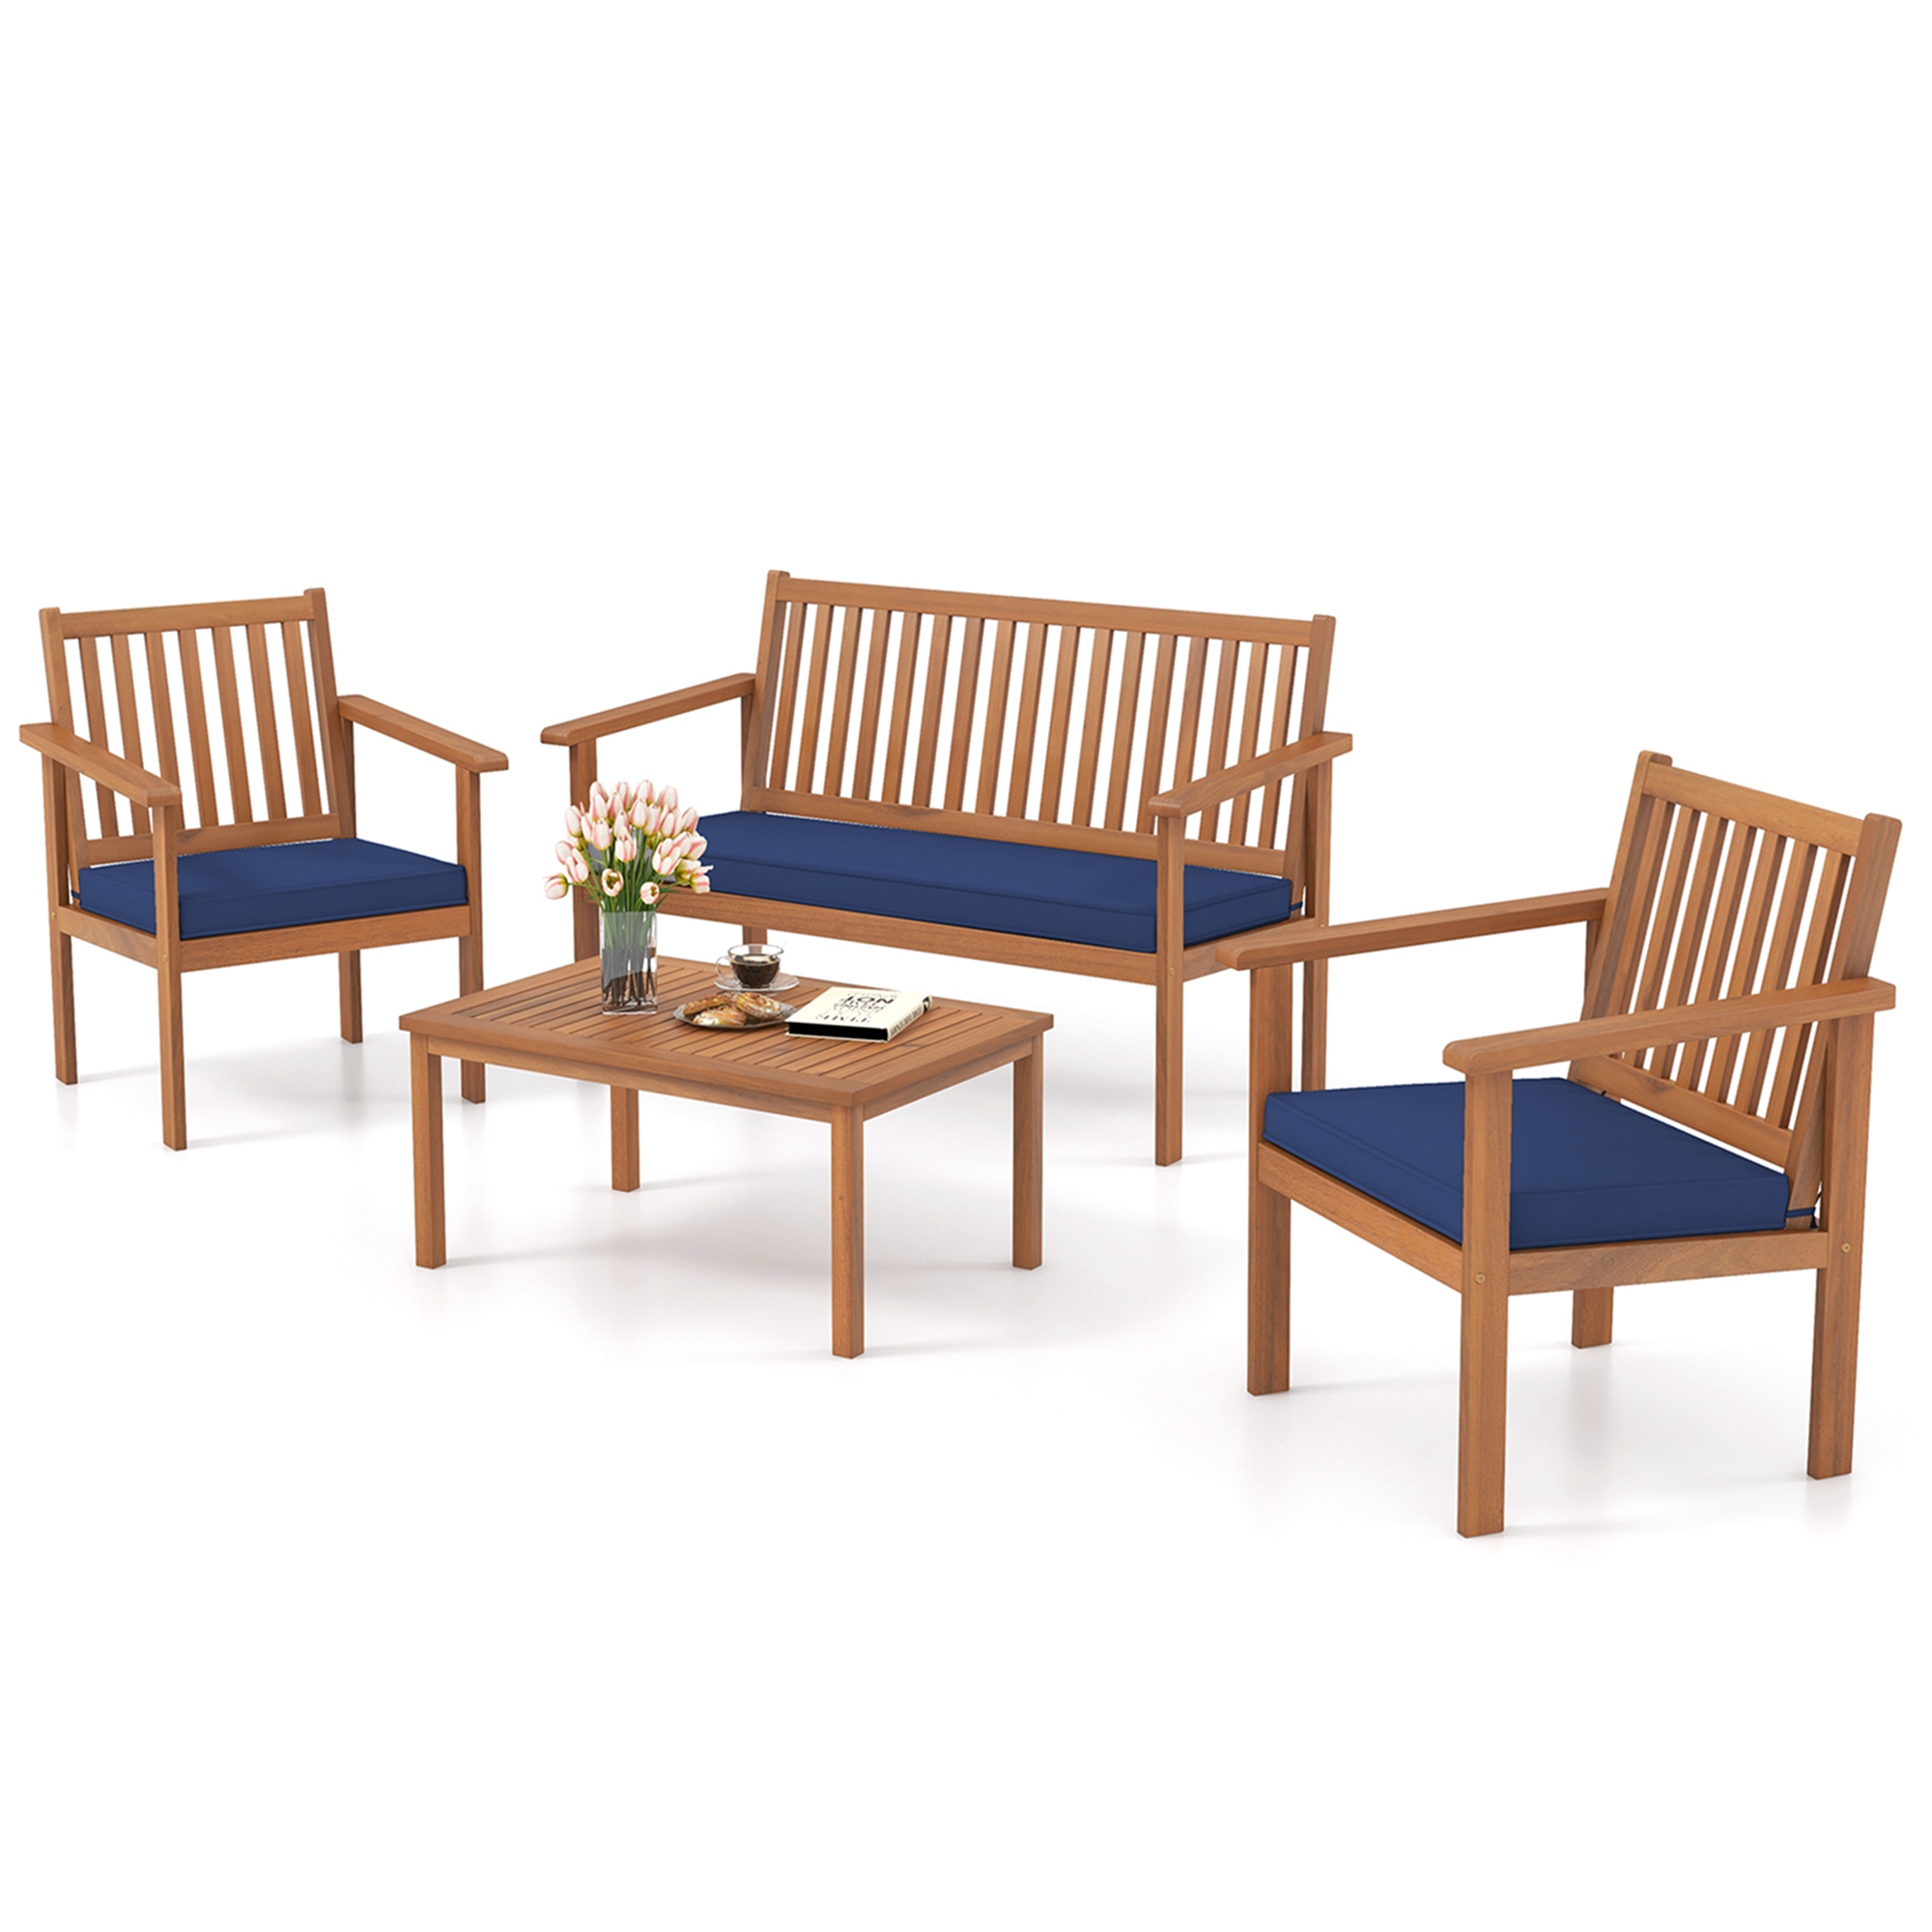 Costway 4 PCS Patio Wood Furniture Set with Loveseat, 2 Chairs & Coffee Table for Porch Navy - image 2 of 10